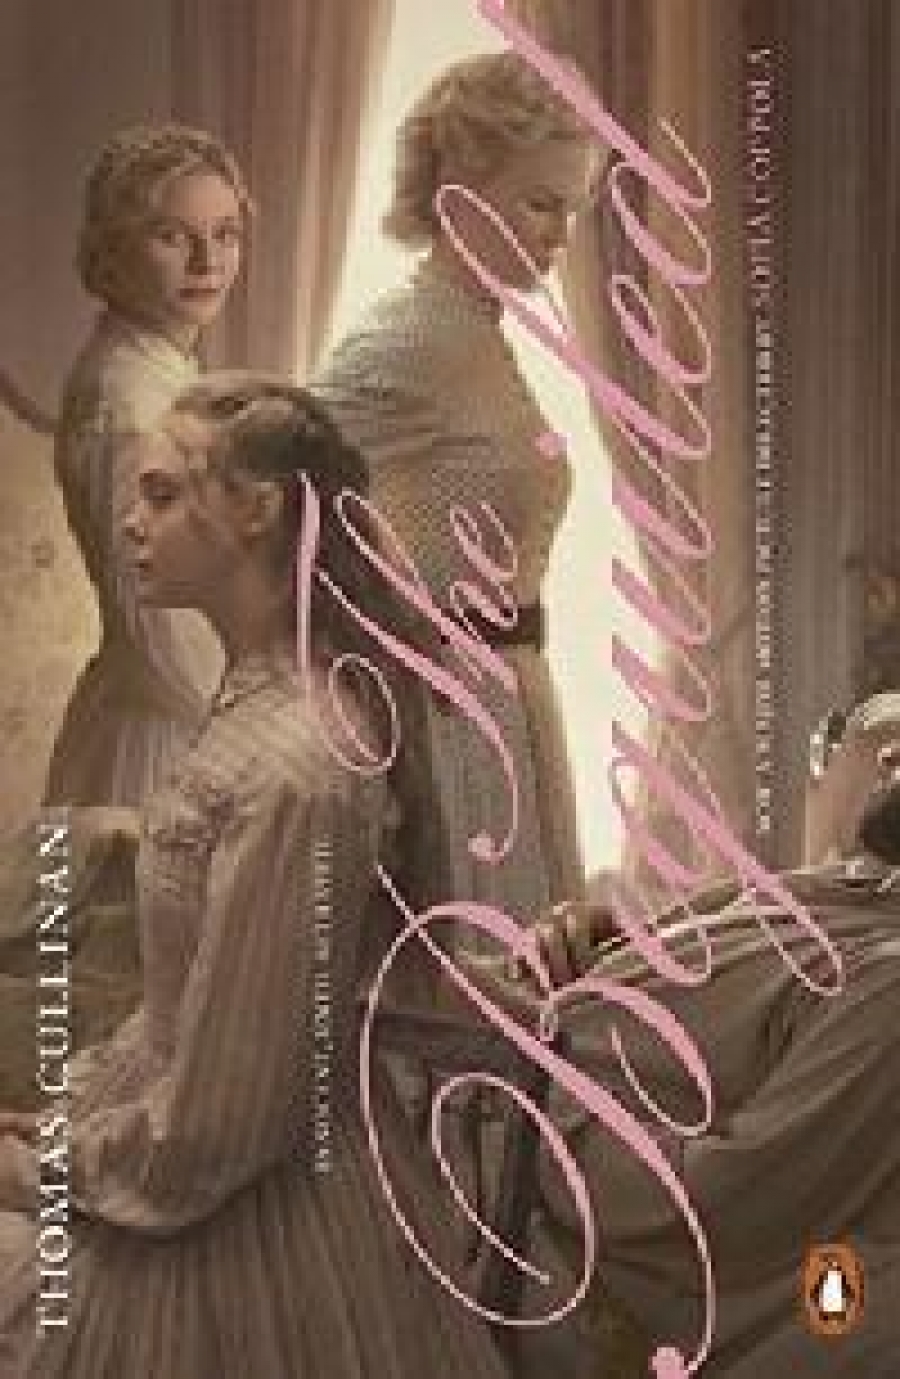 Cullinan Thomas The Beguiled: film tie in 